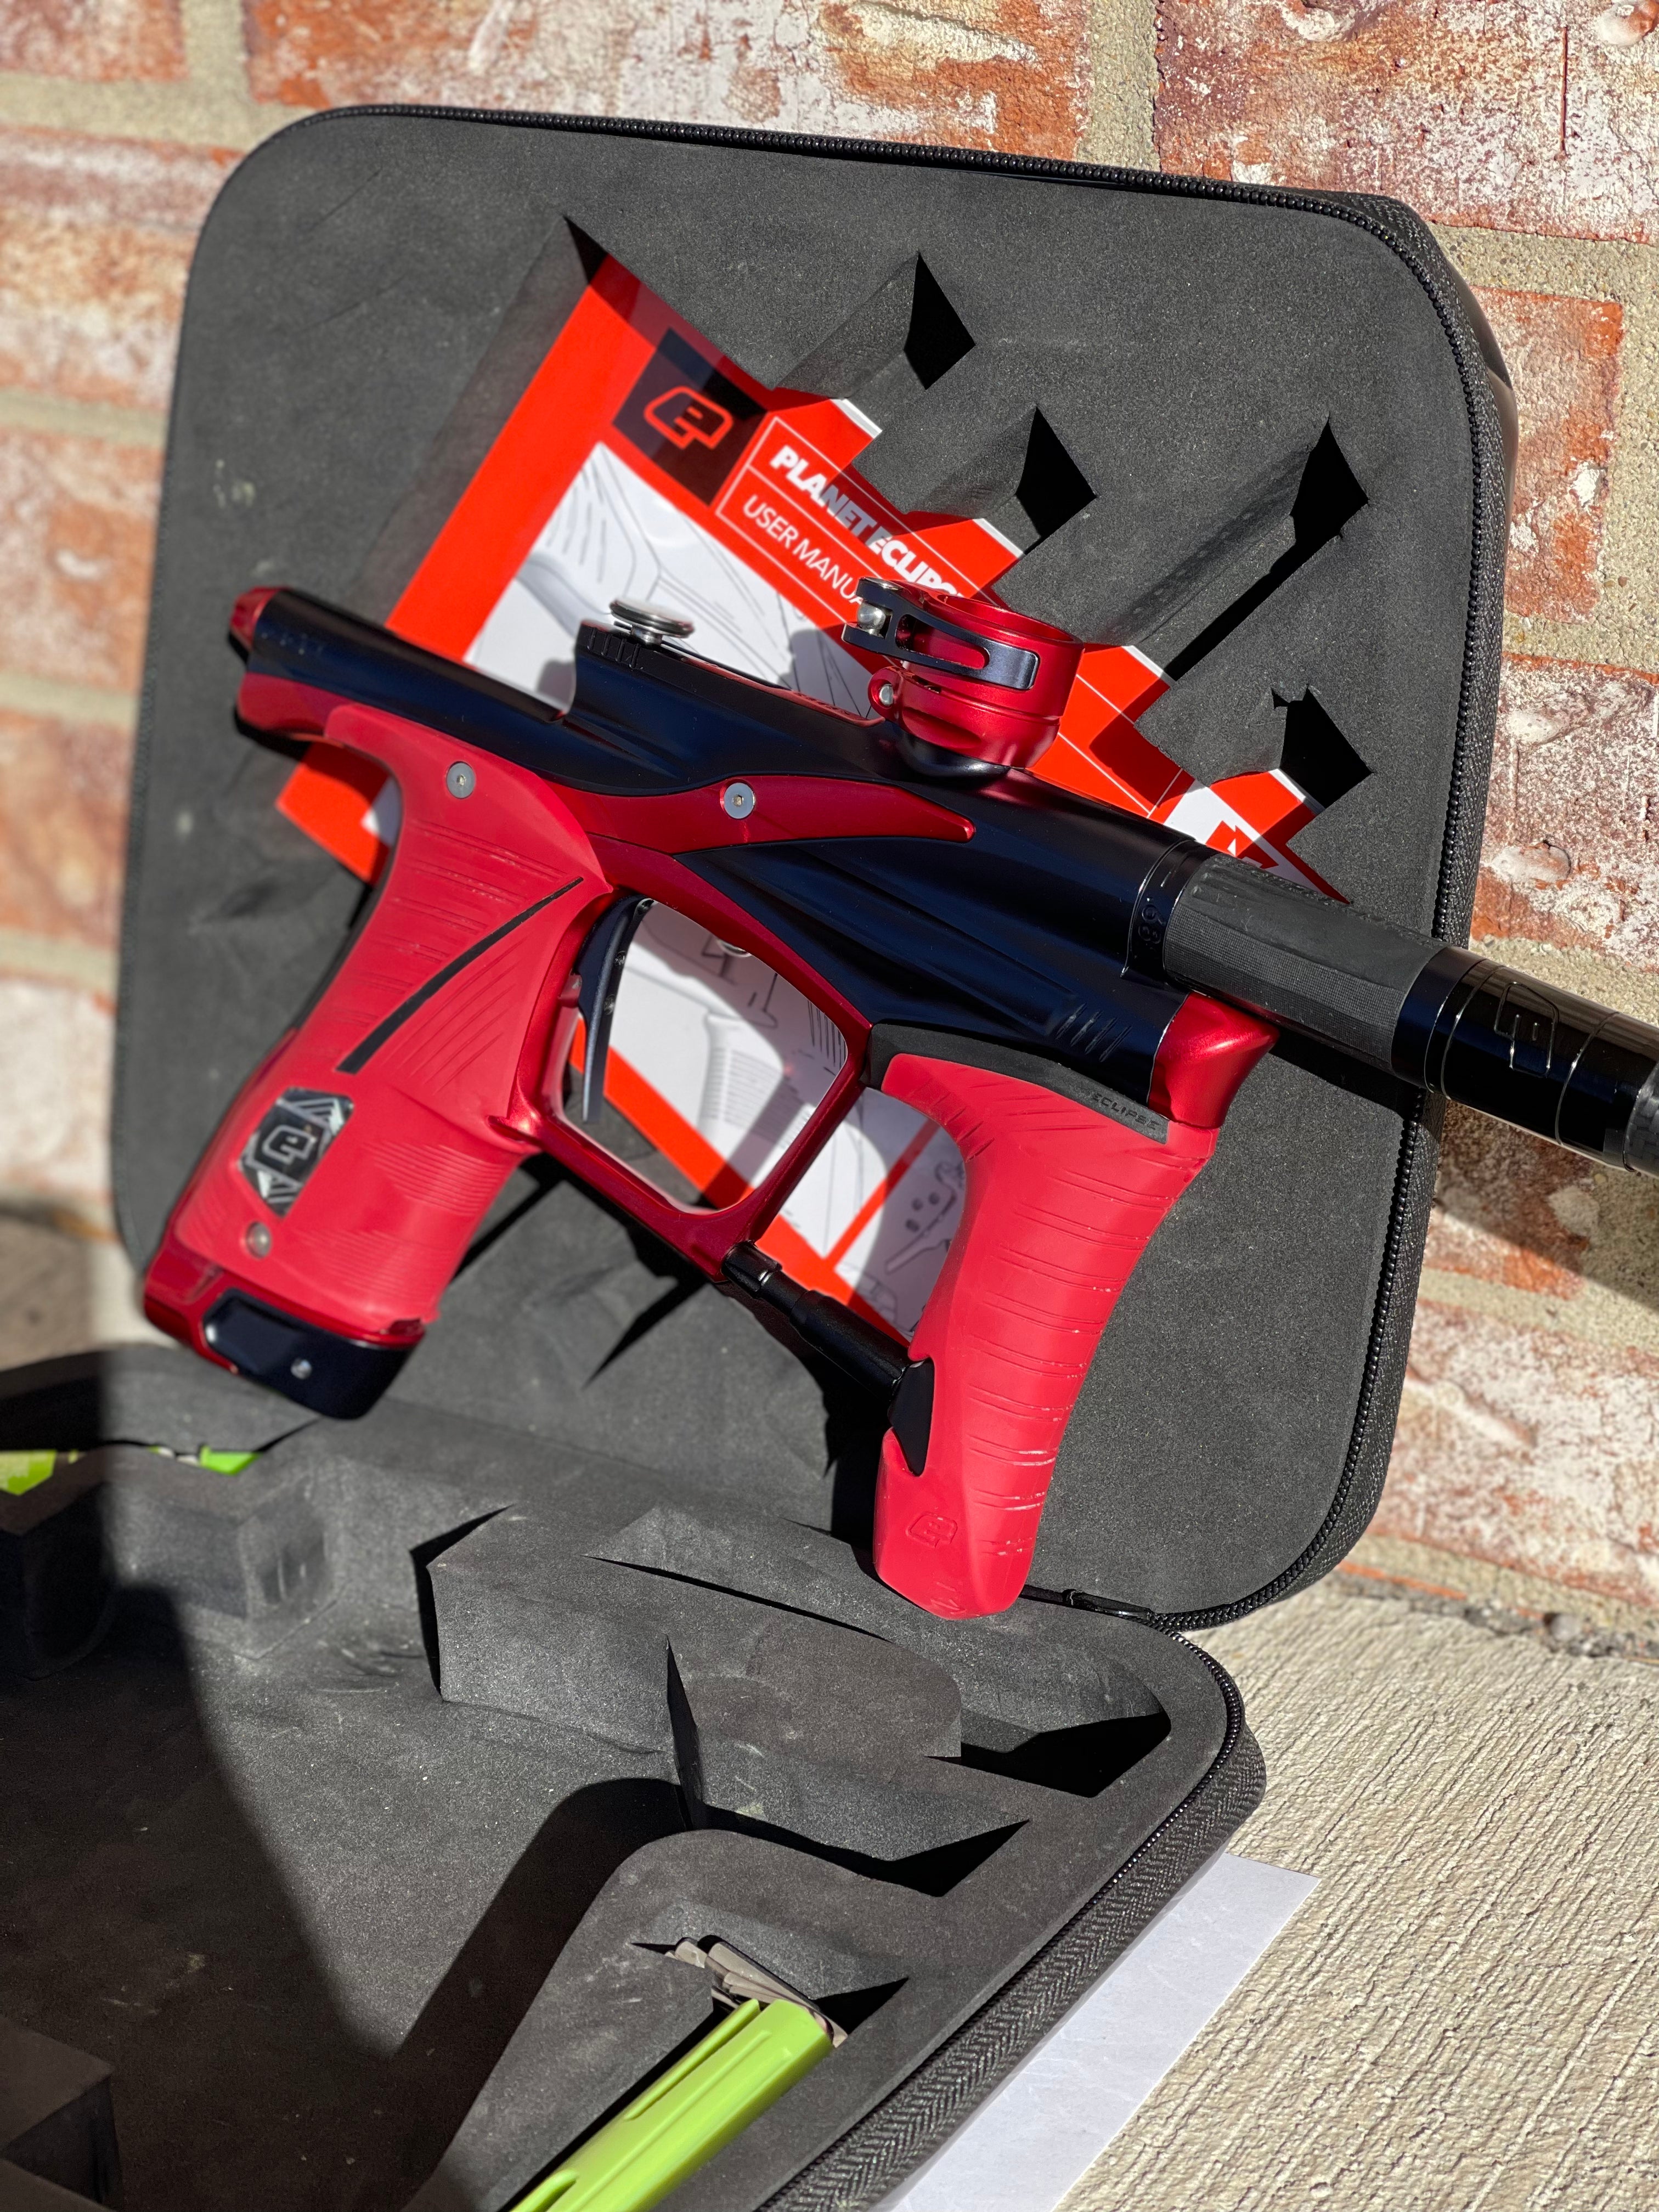 Planet Eclipse LV 1.6 Grip Red